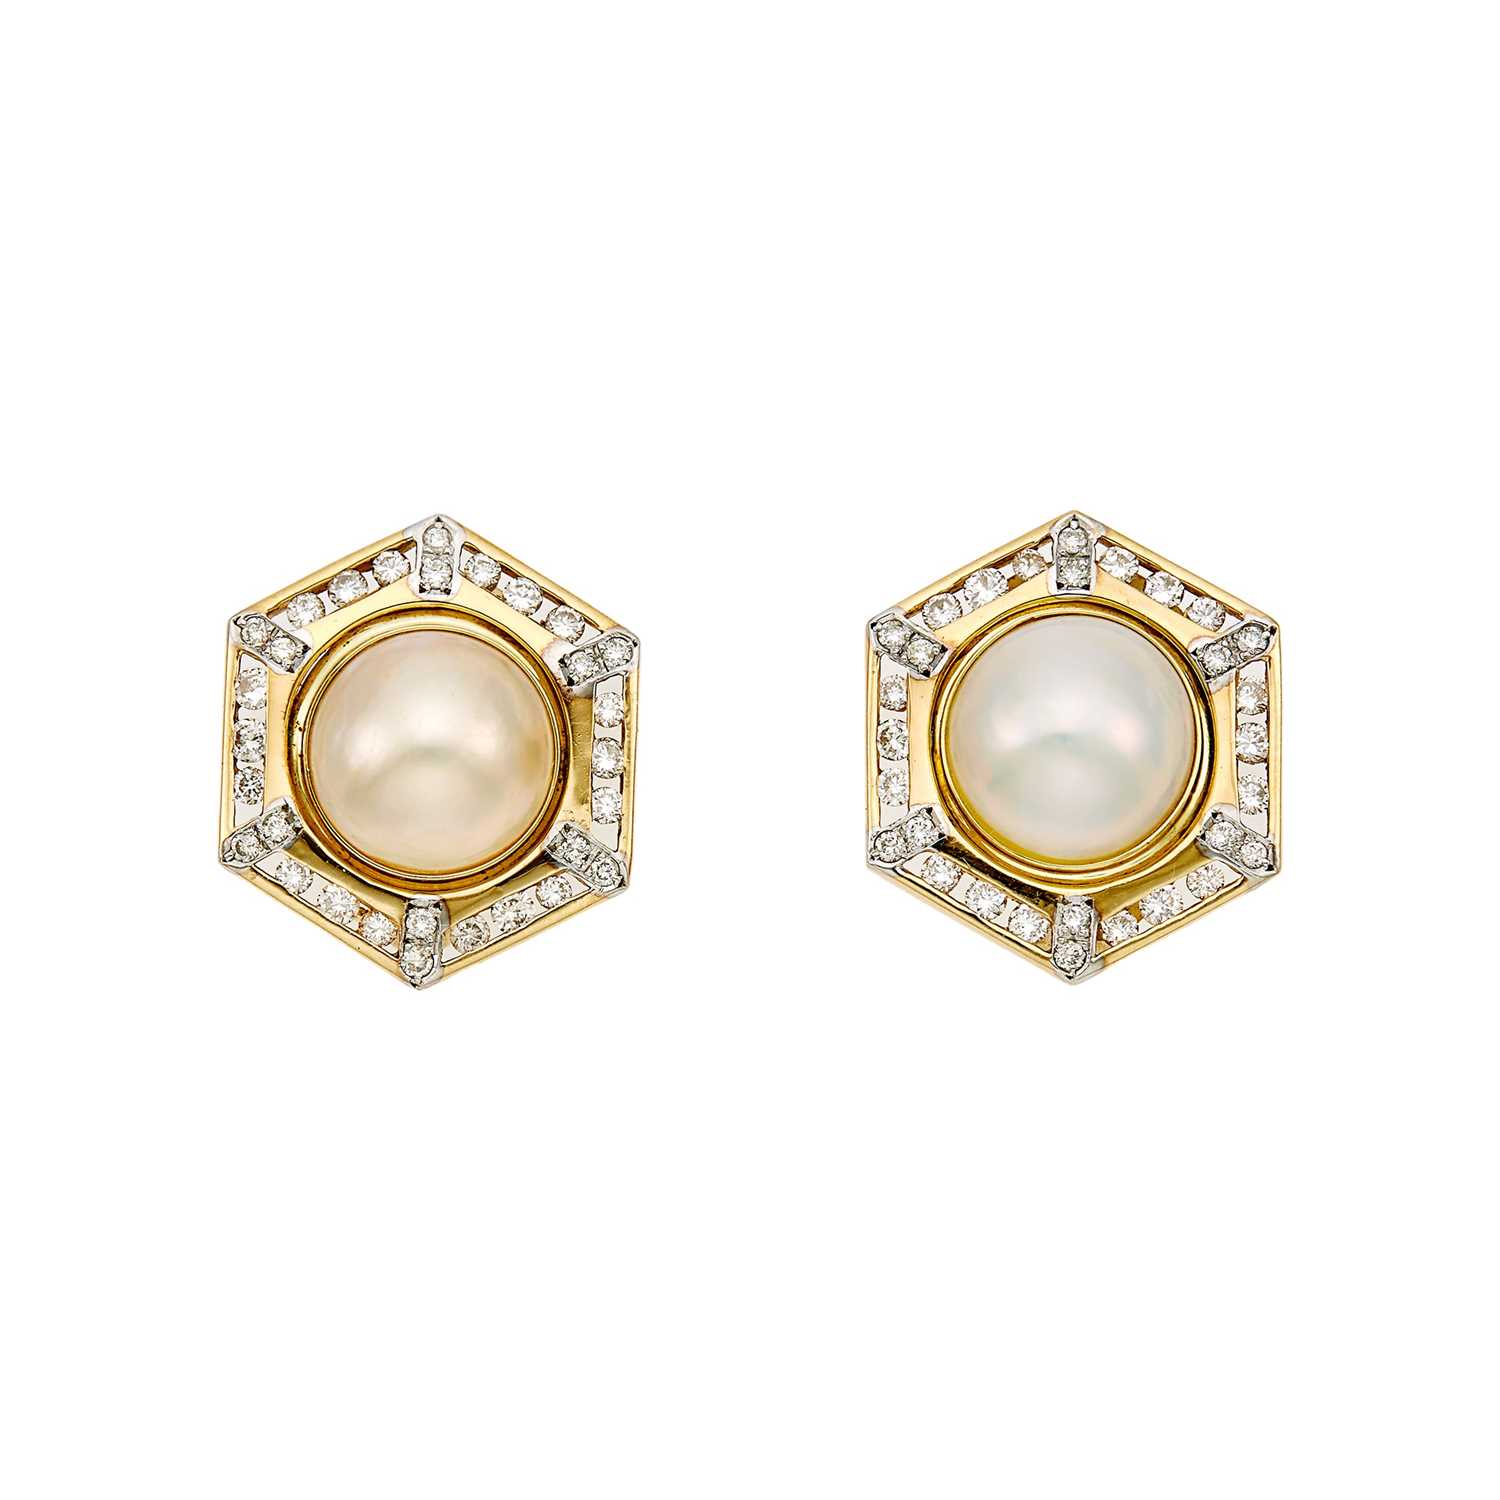 Lot 1233 - Pair of Gold, Mabé Pearl and Diamond Earclips